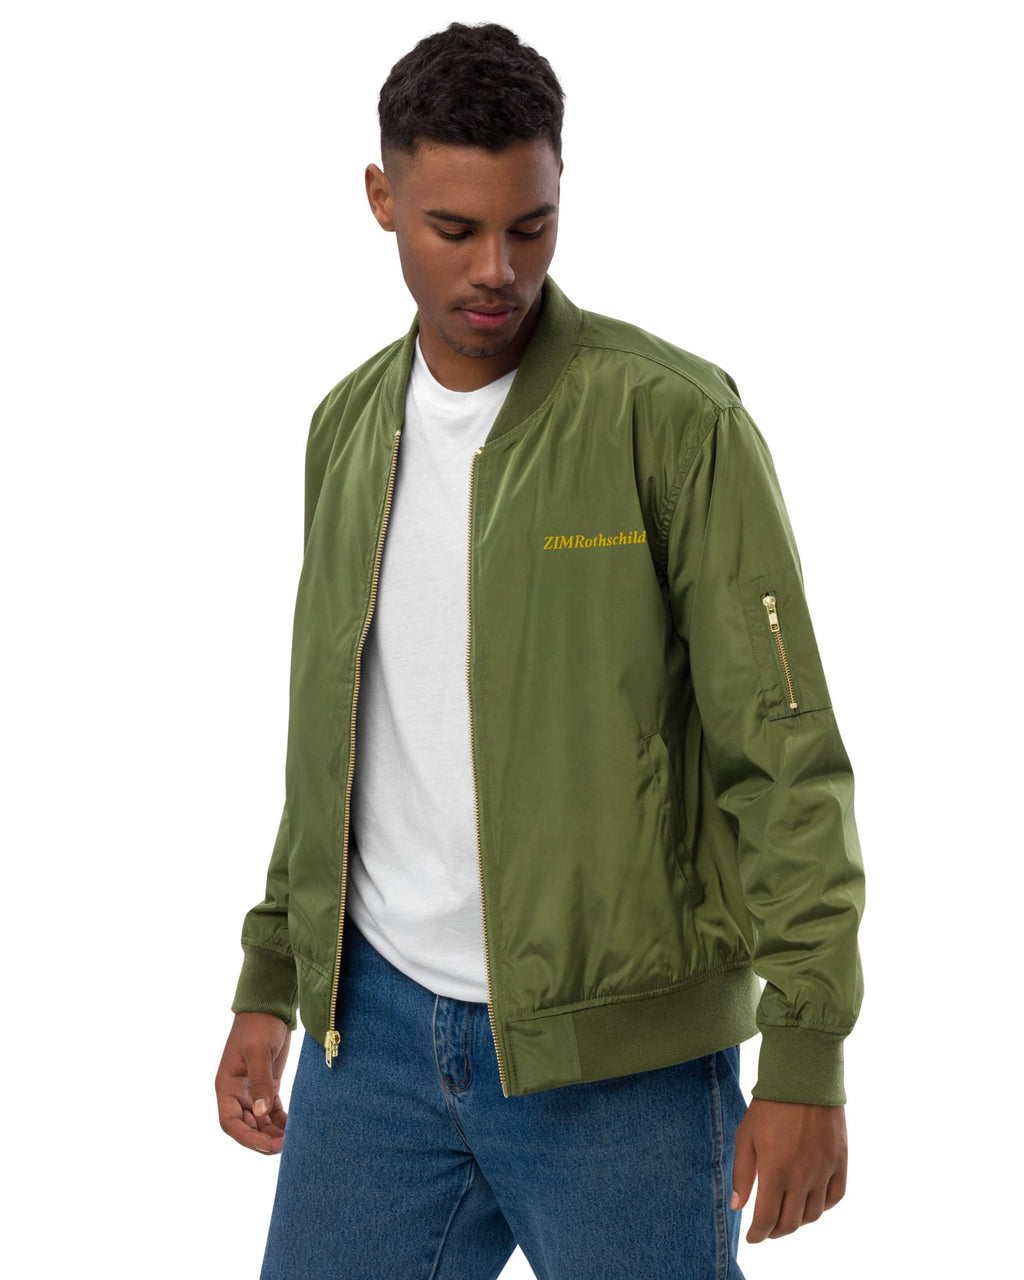 Men's Bomber Jacket with PrimaLoft® in Olive from Joe Fresh